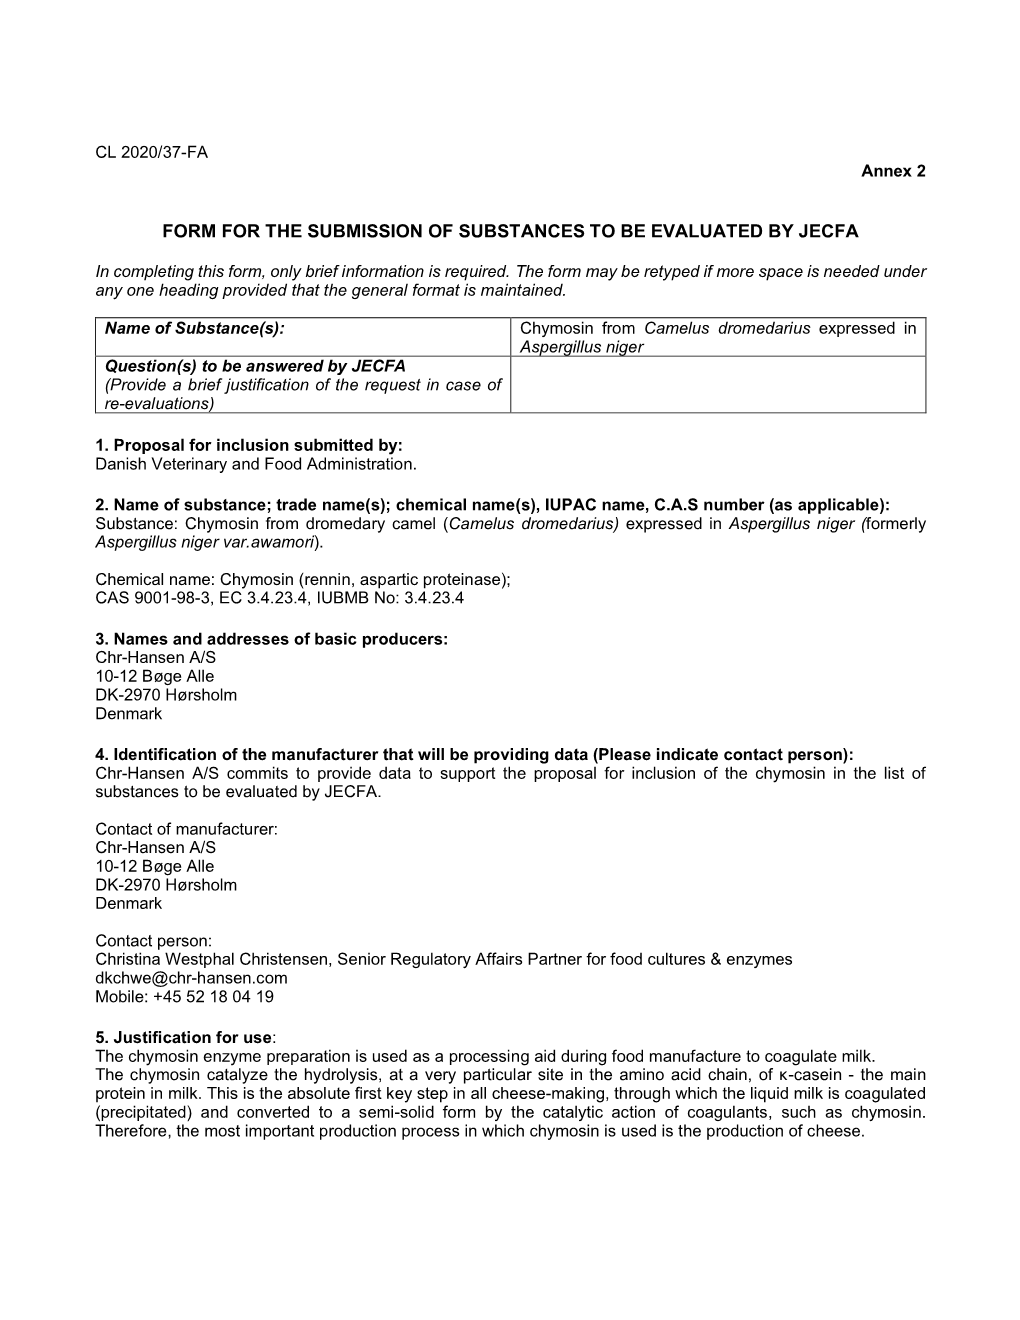 Form for the Submission of Substances to Be Evaluated by Jecfa